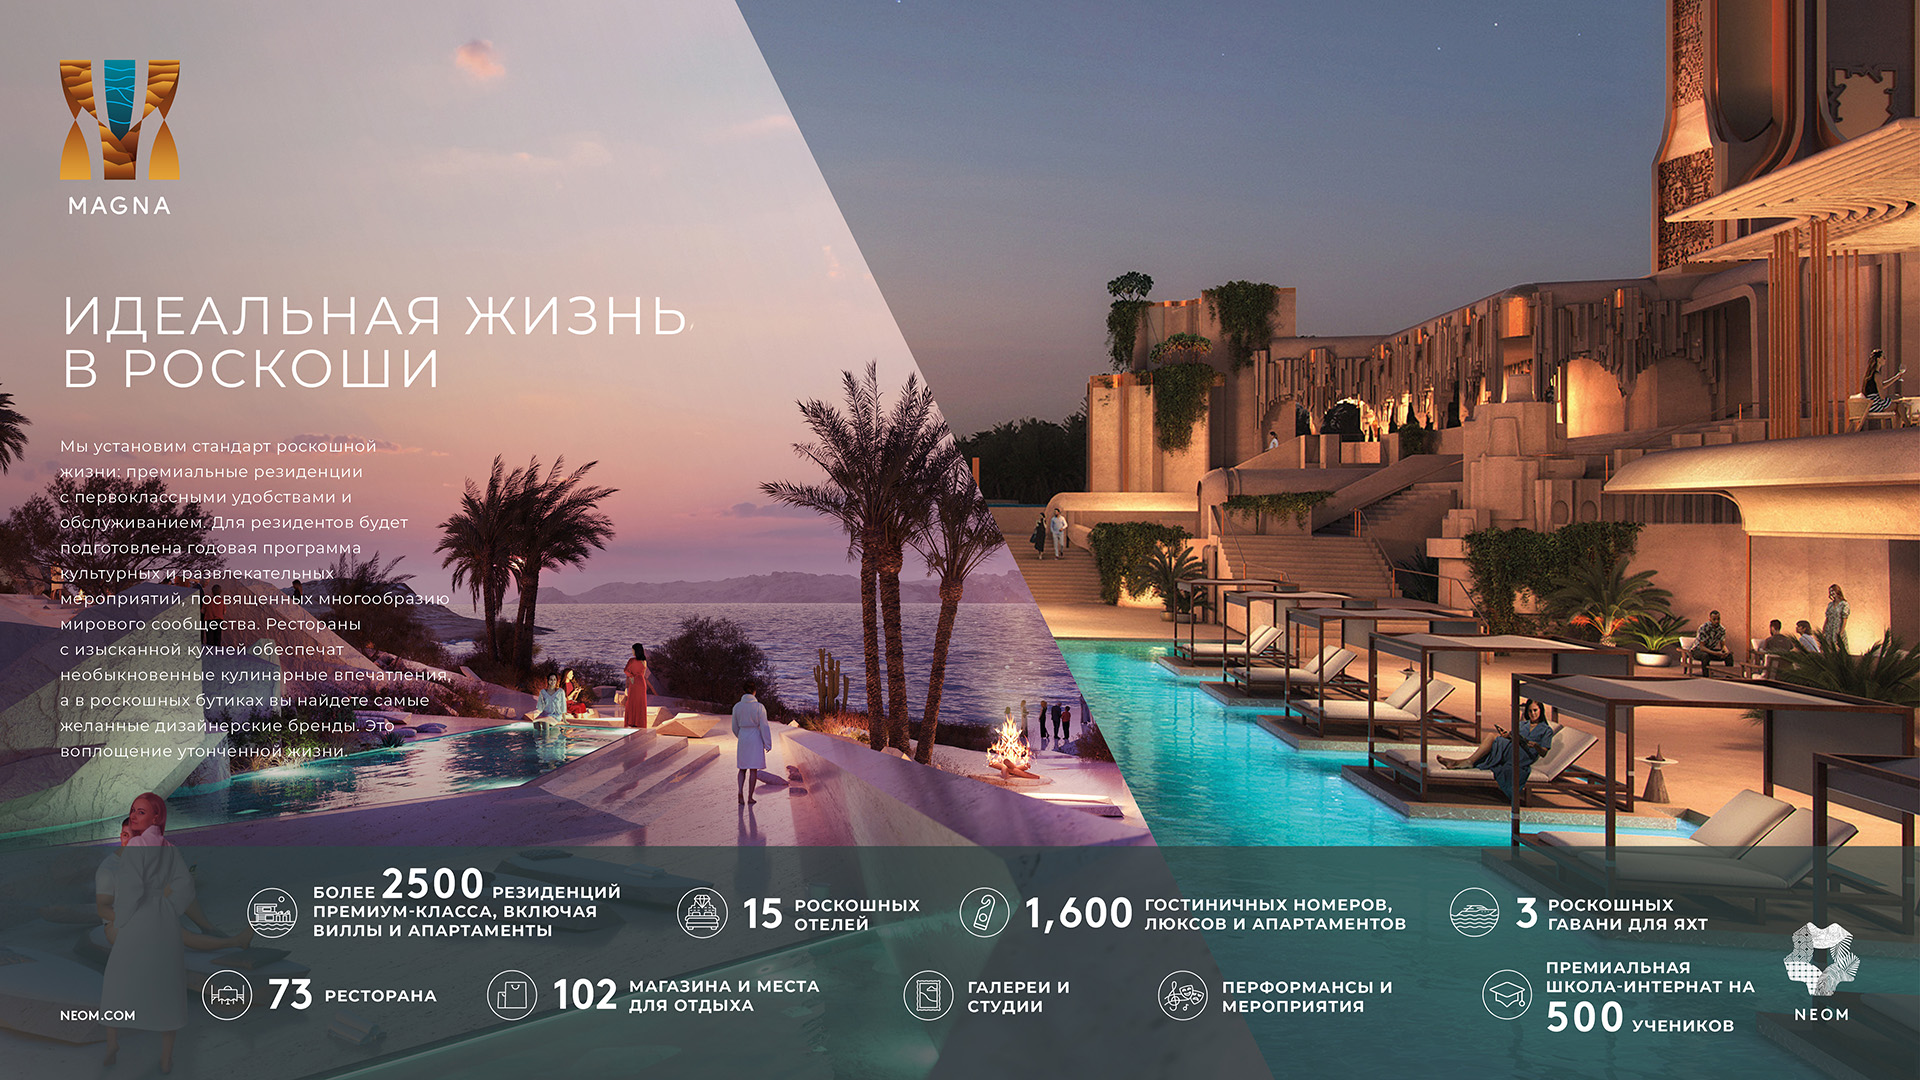 MAGNA Infographic - The Ultimate in Luxury Living